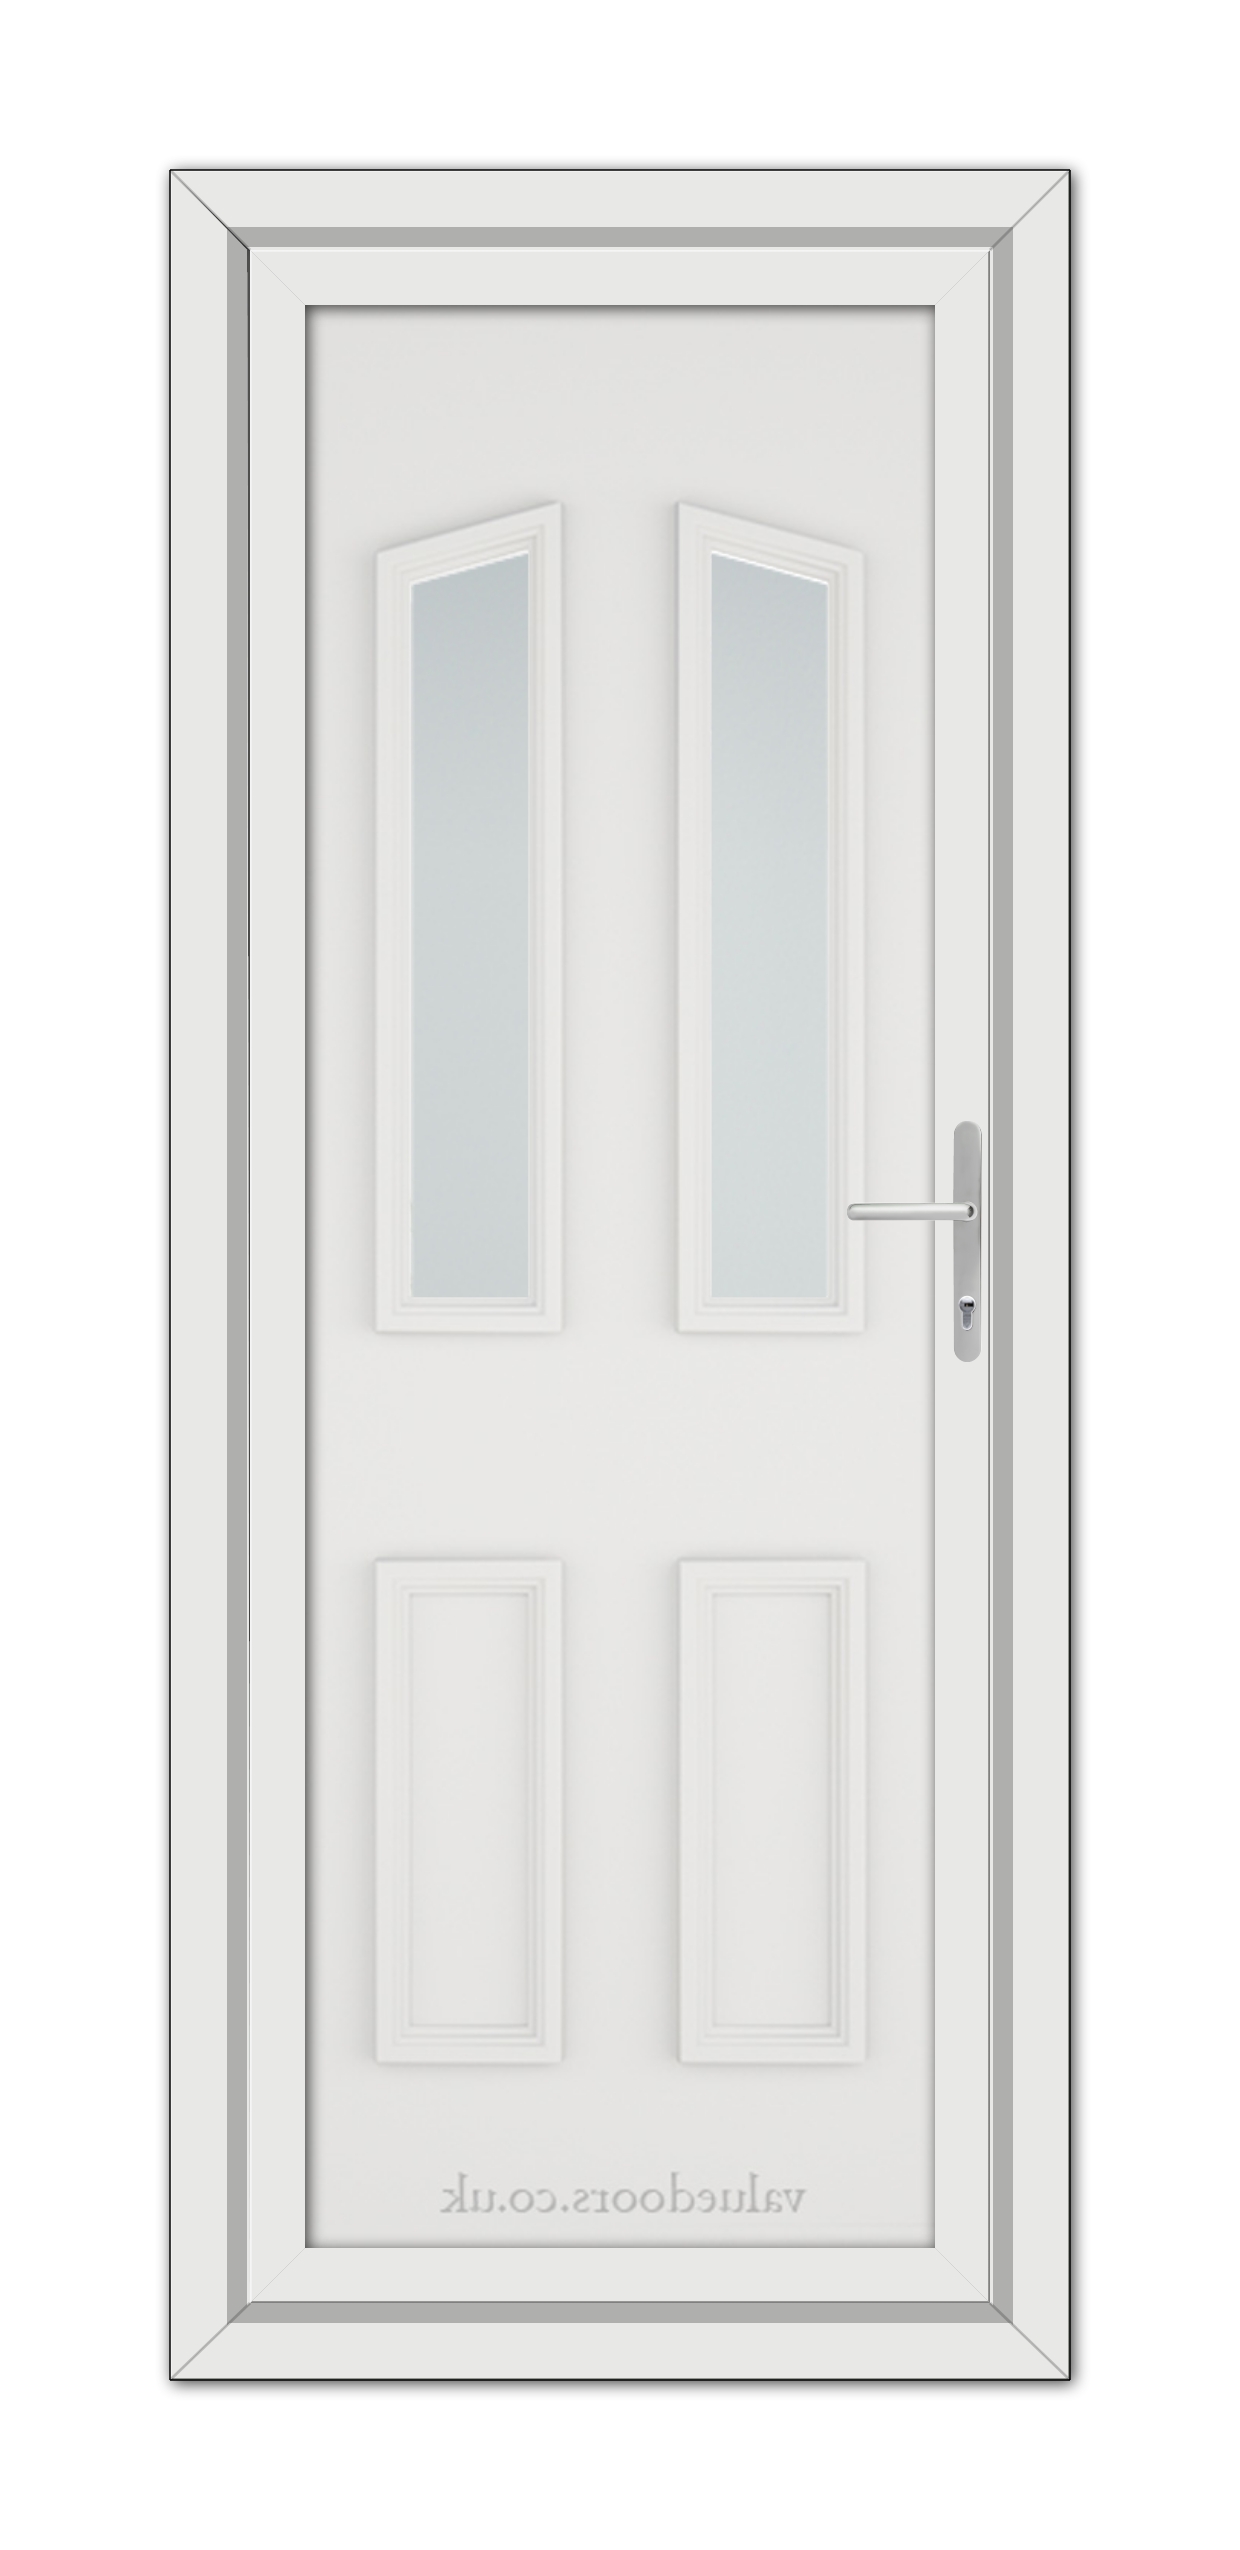 White Kensington uPVC Door with a silver handle and two vertical glass panels, set within a gray frame, viewed from the front.